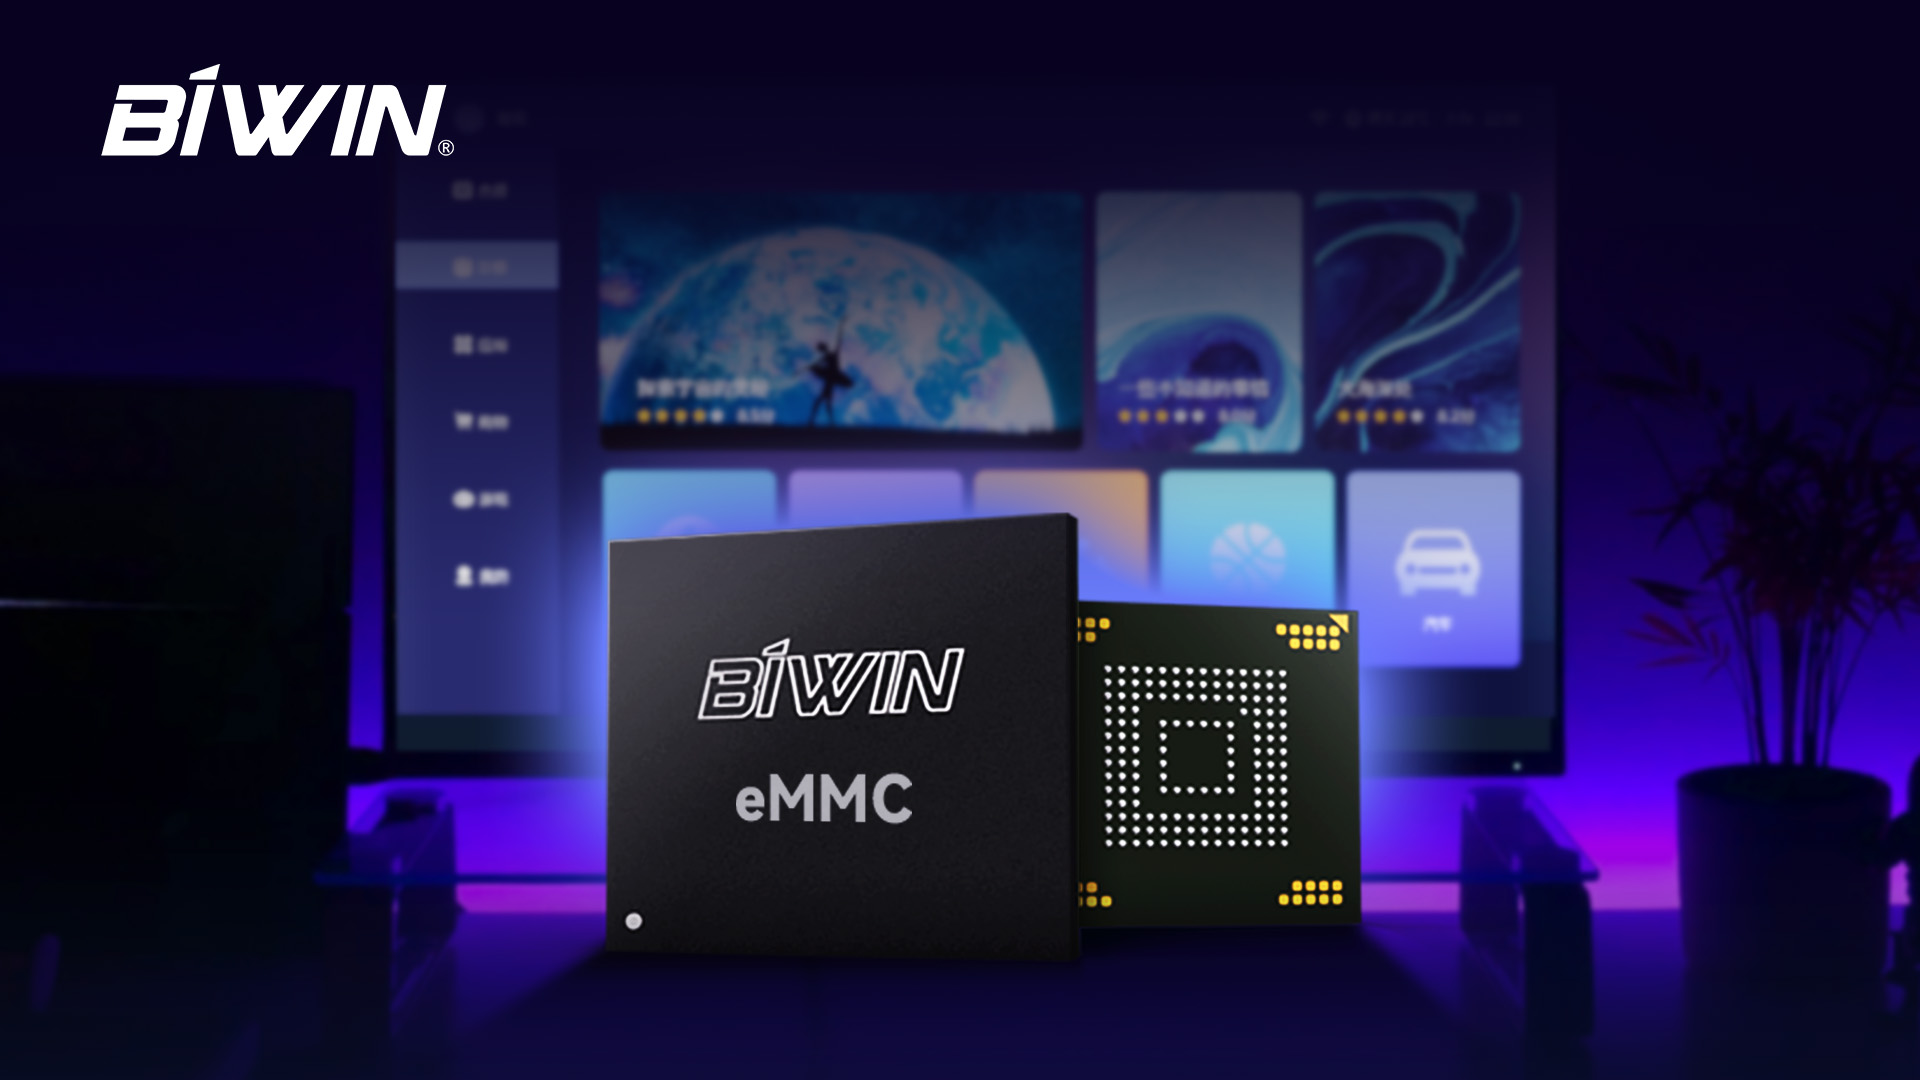 BIWIN eMMC Steps into the World of Entertainment